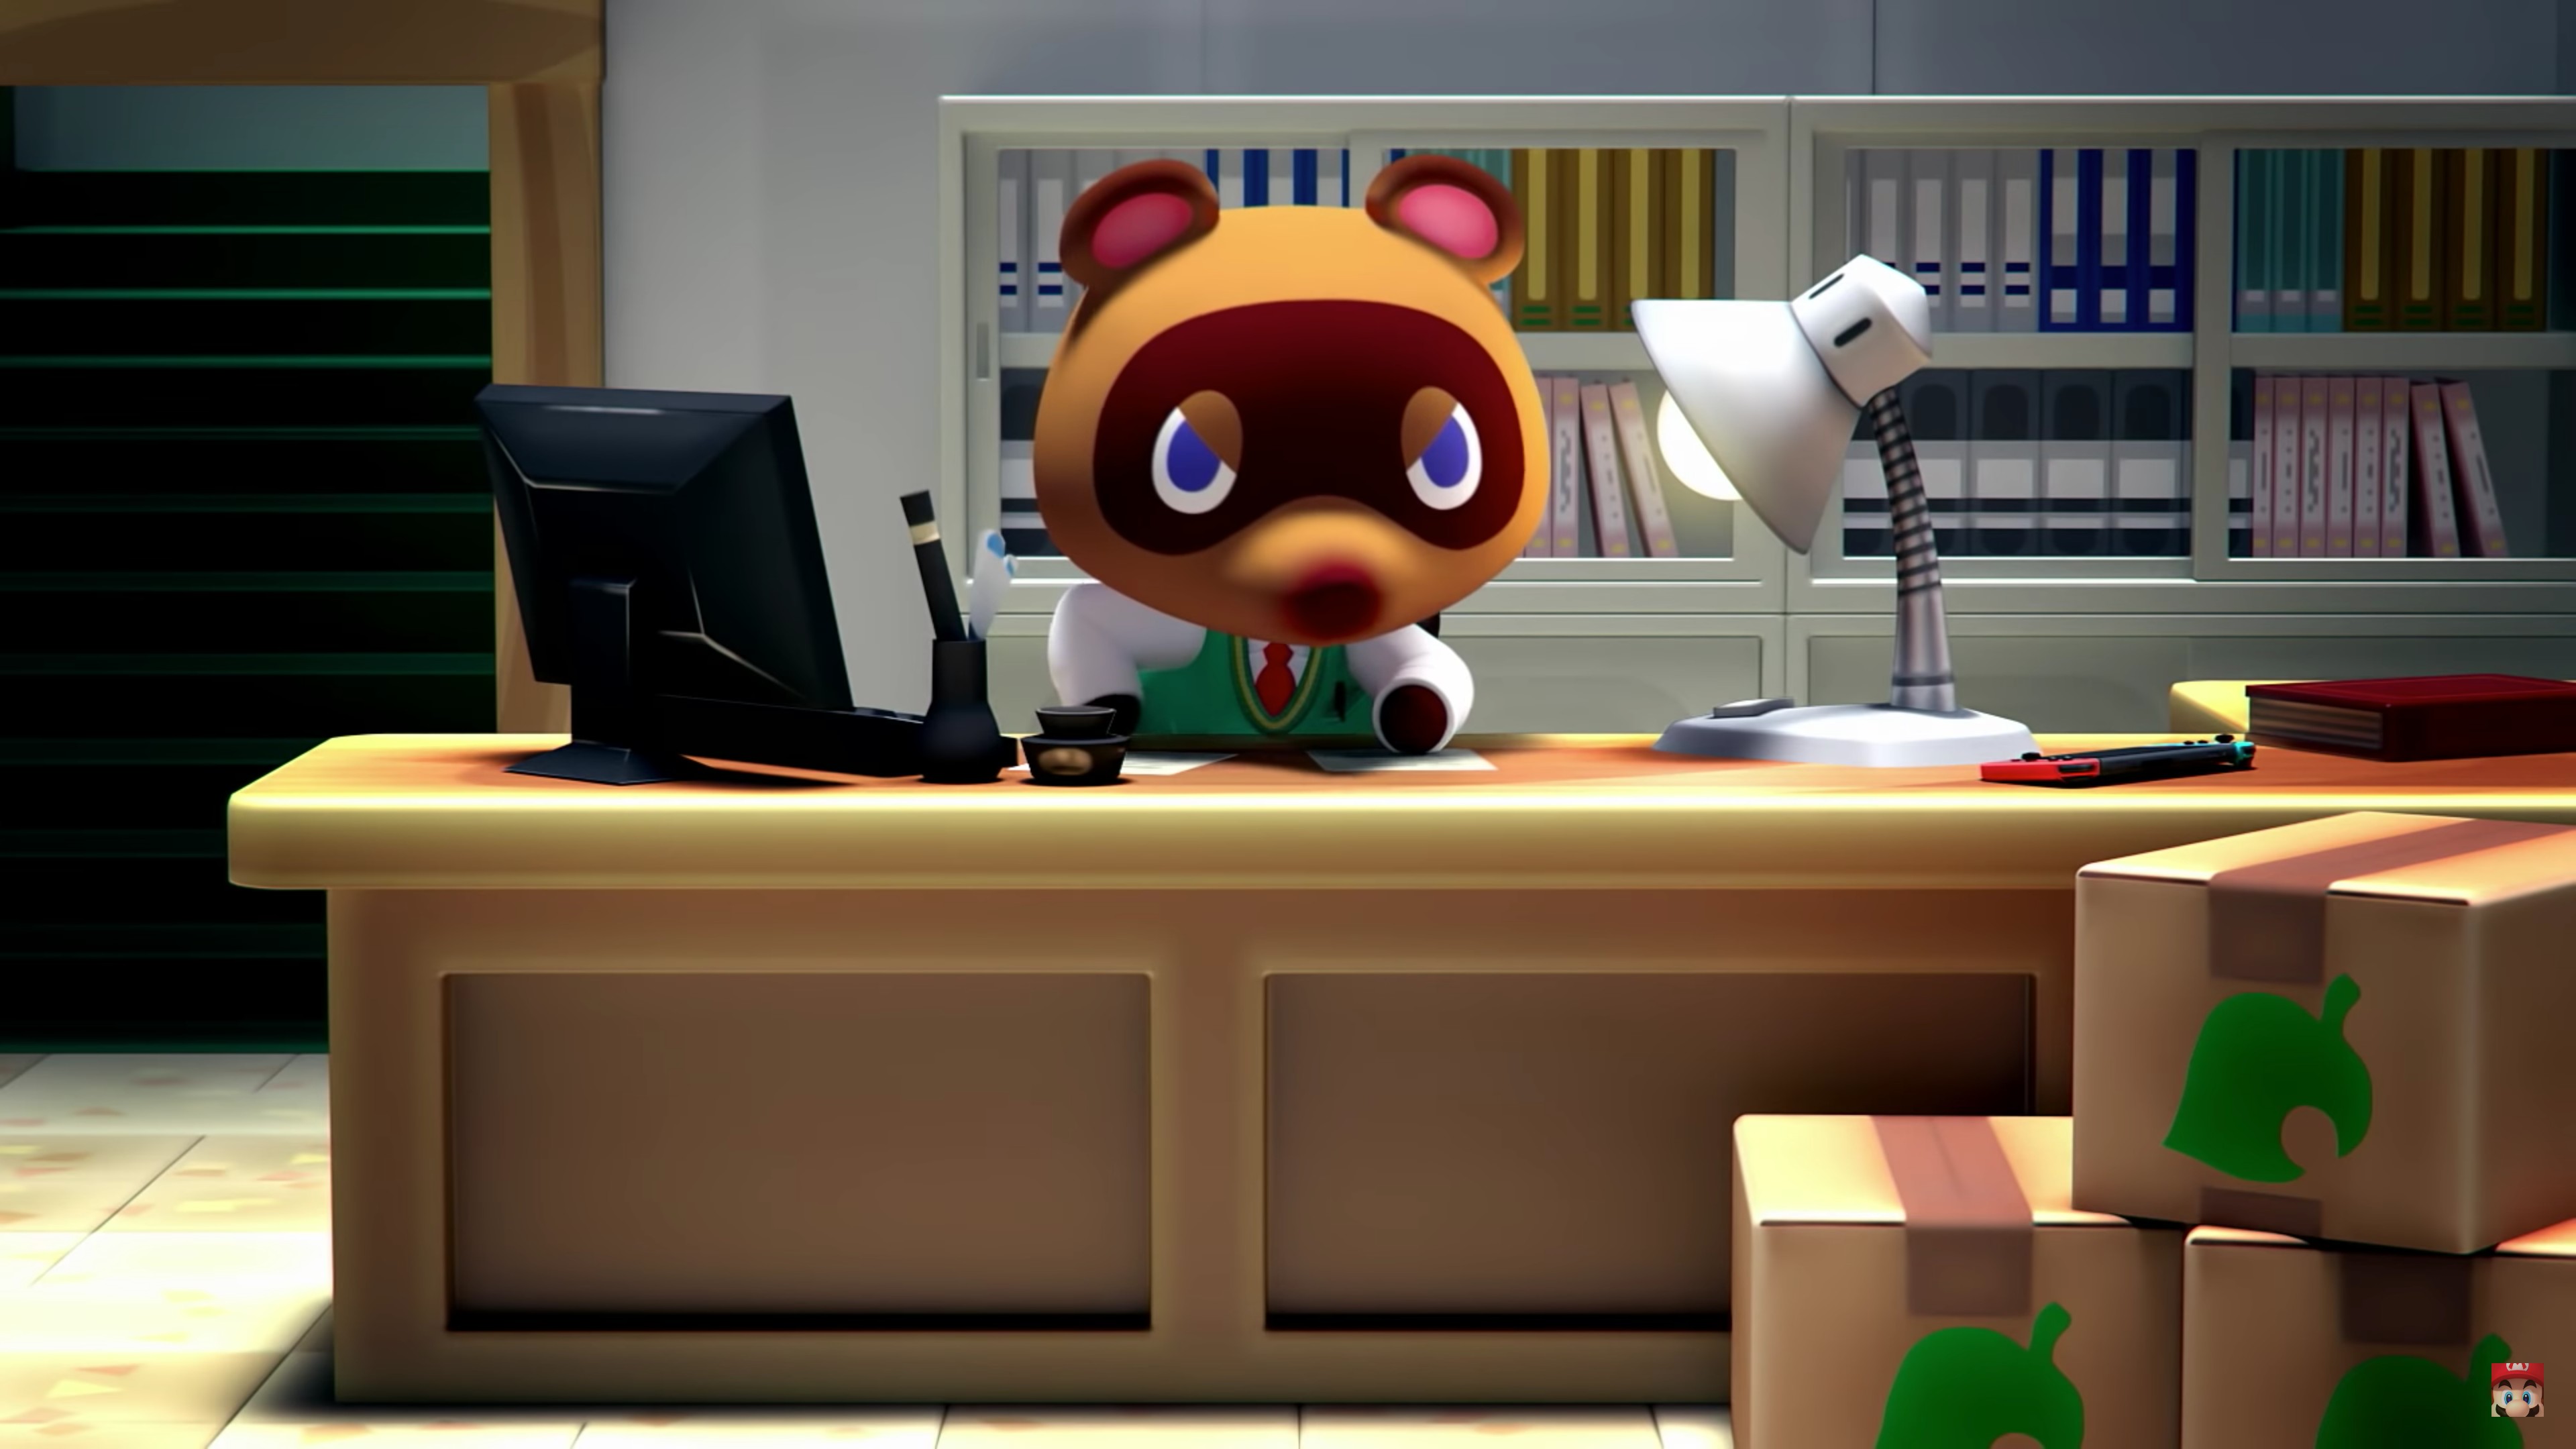 Animal Crossing Porn Animation - Animal Crossing Porn Combines Villagers and the Horniness of Isolation